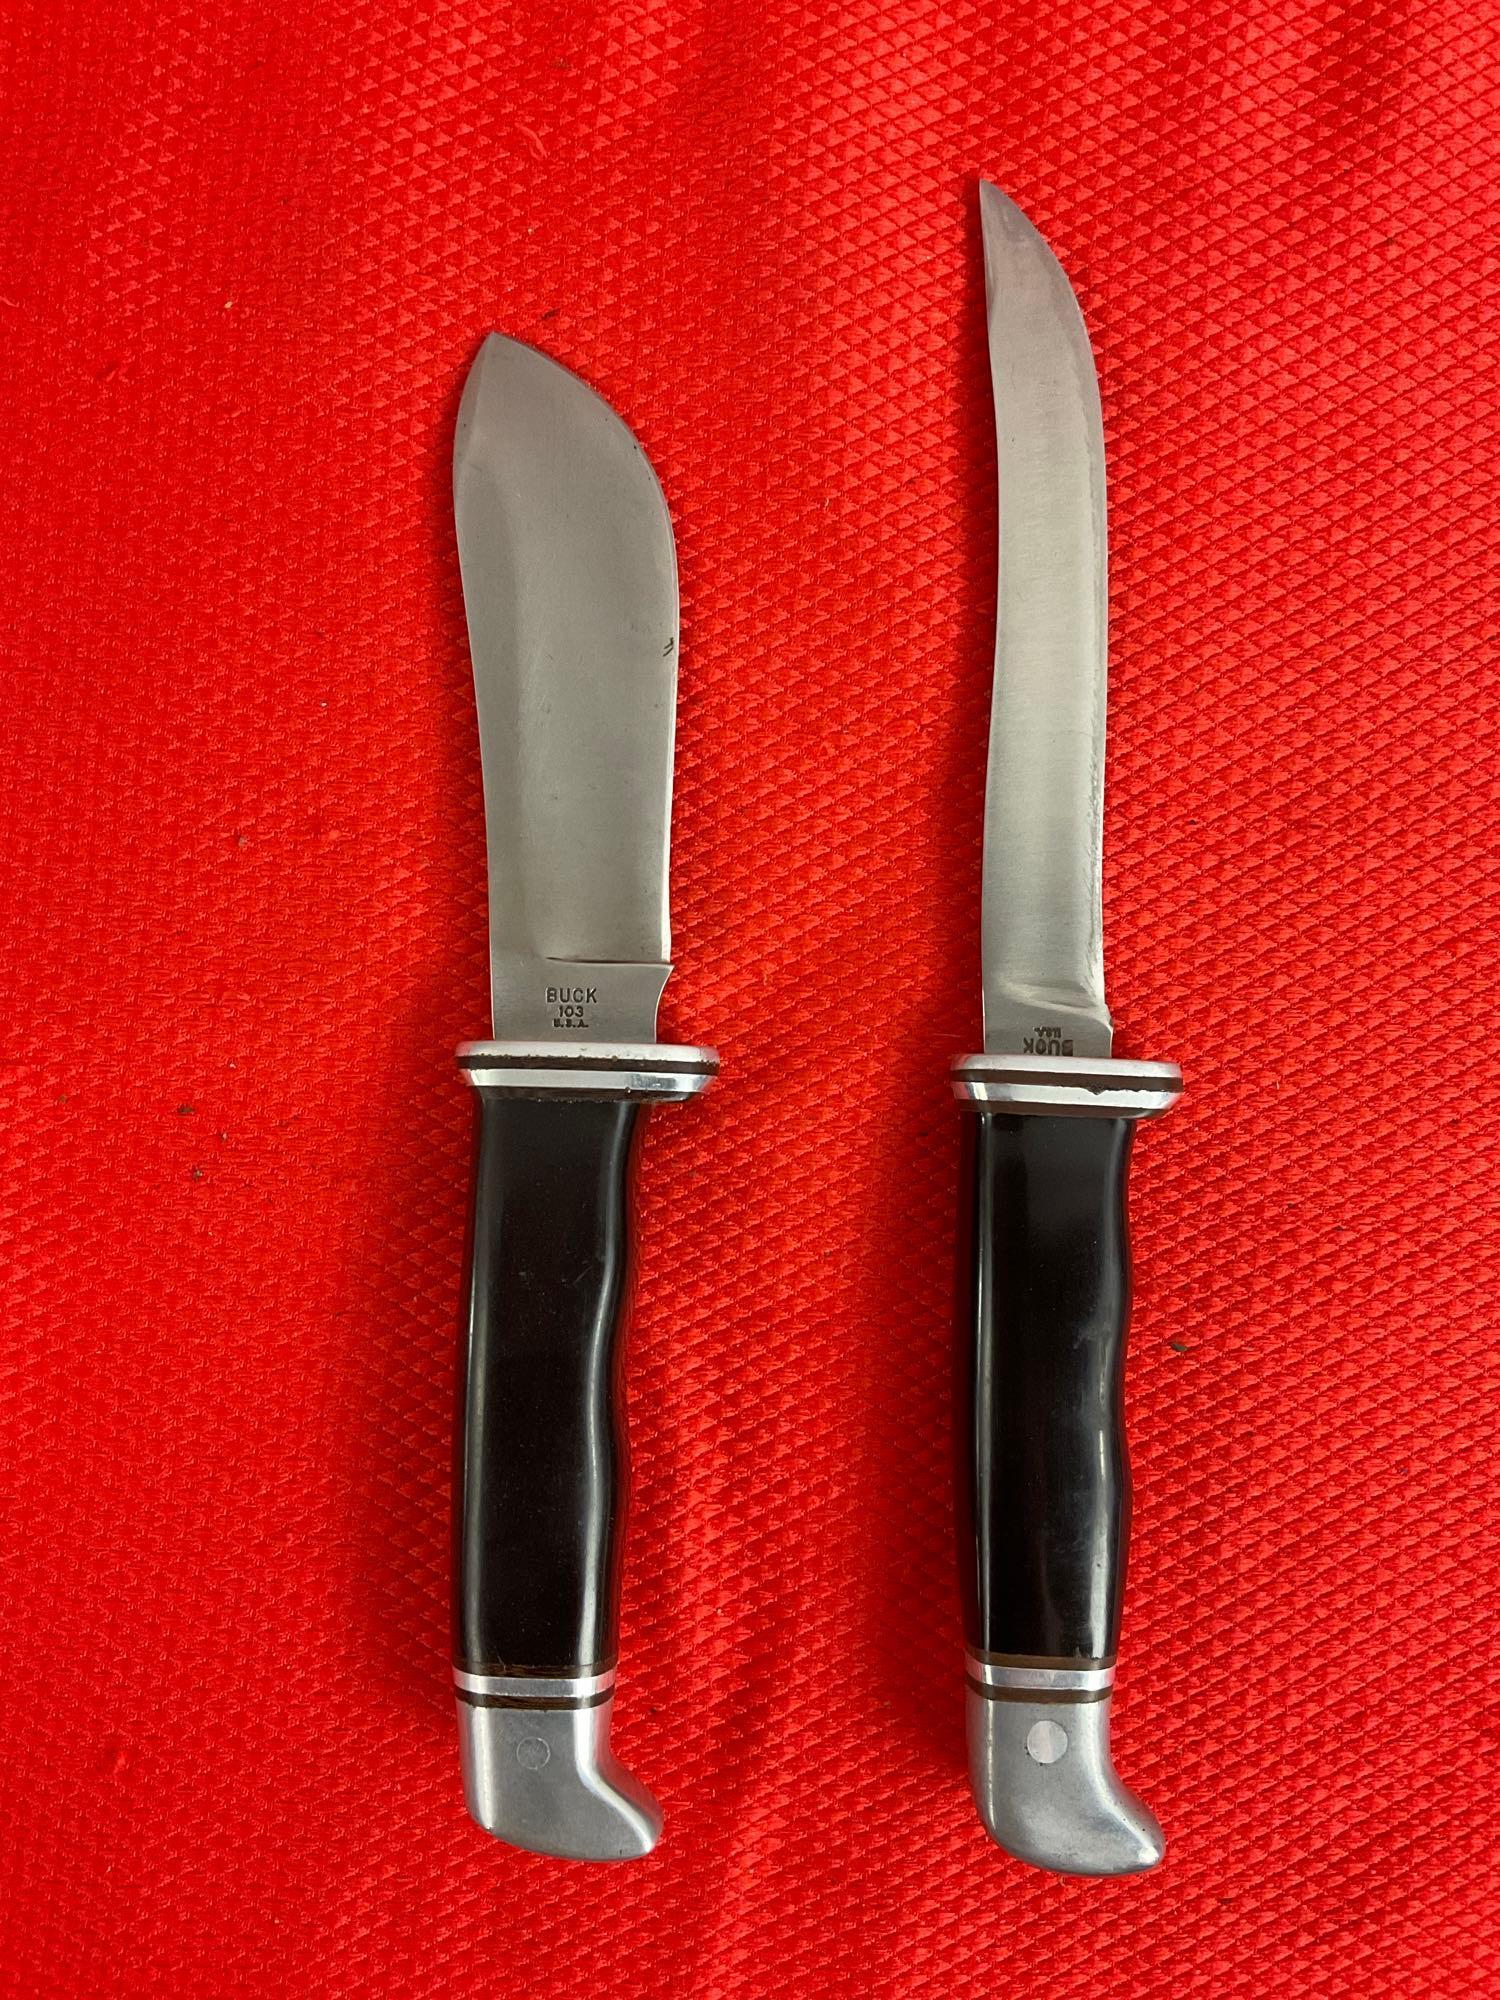 2 pcs Buck Steel Fixed Blade Hunting Knives w/ Leather Sheathes & Composite Handles. Model 103. See